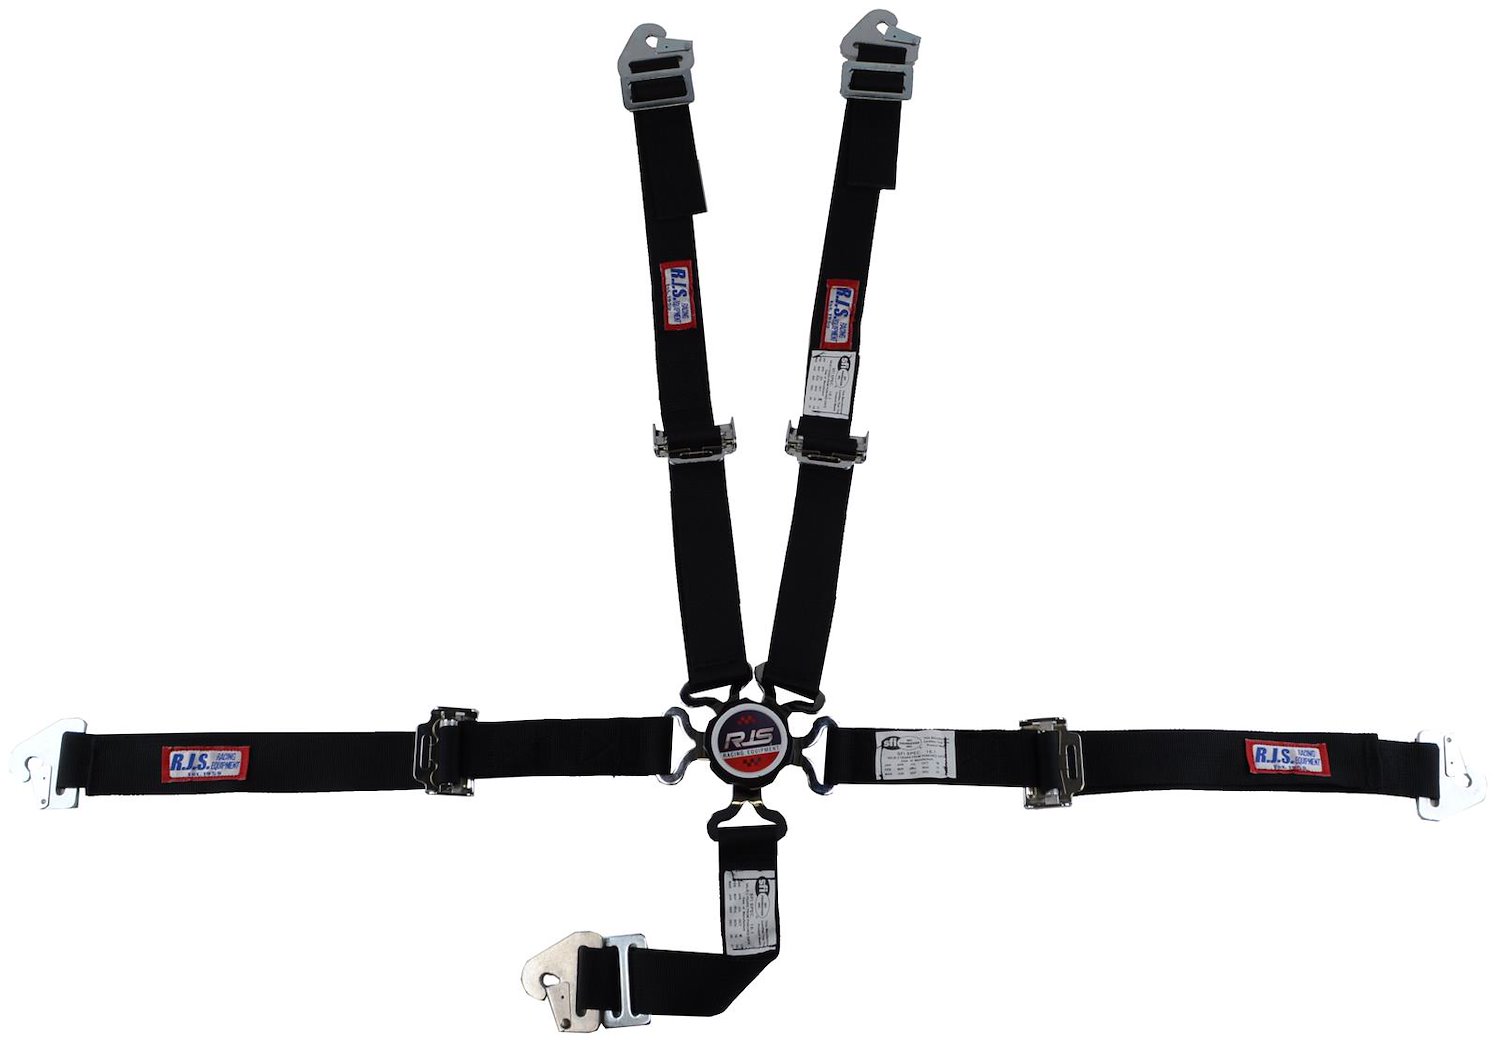 SFI 16.1 CAM-LOCK HARNESS 2 PULL UP Lap Belt 2 Shoulder Harness Individual FLOOR Mount 2 SINGLE Sub ALL WRAP ENDS GRAY